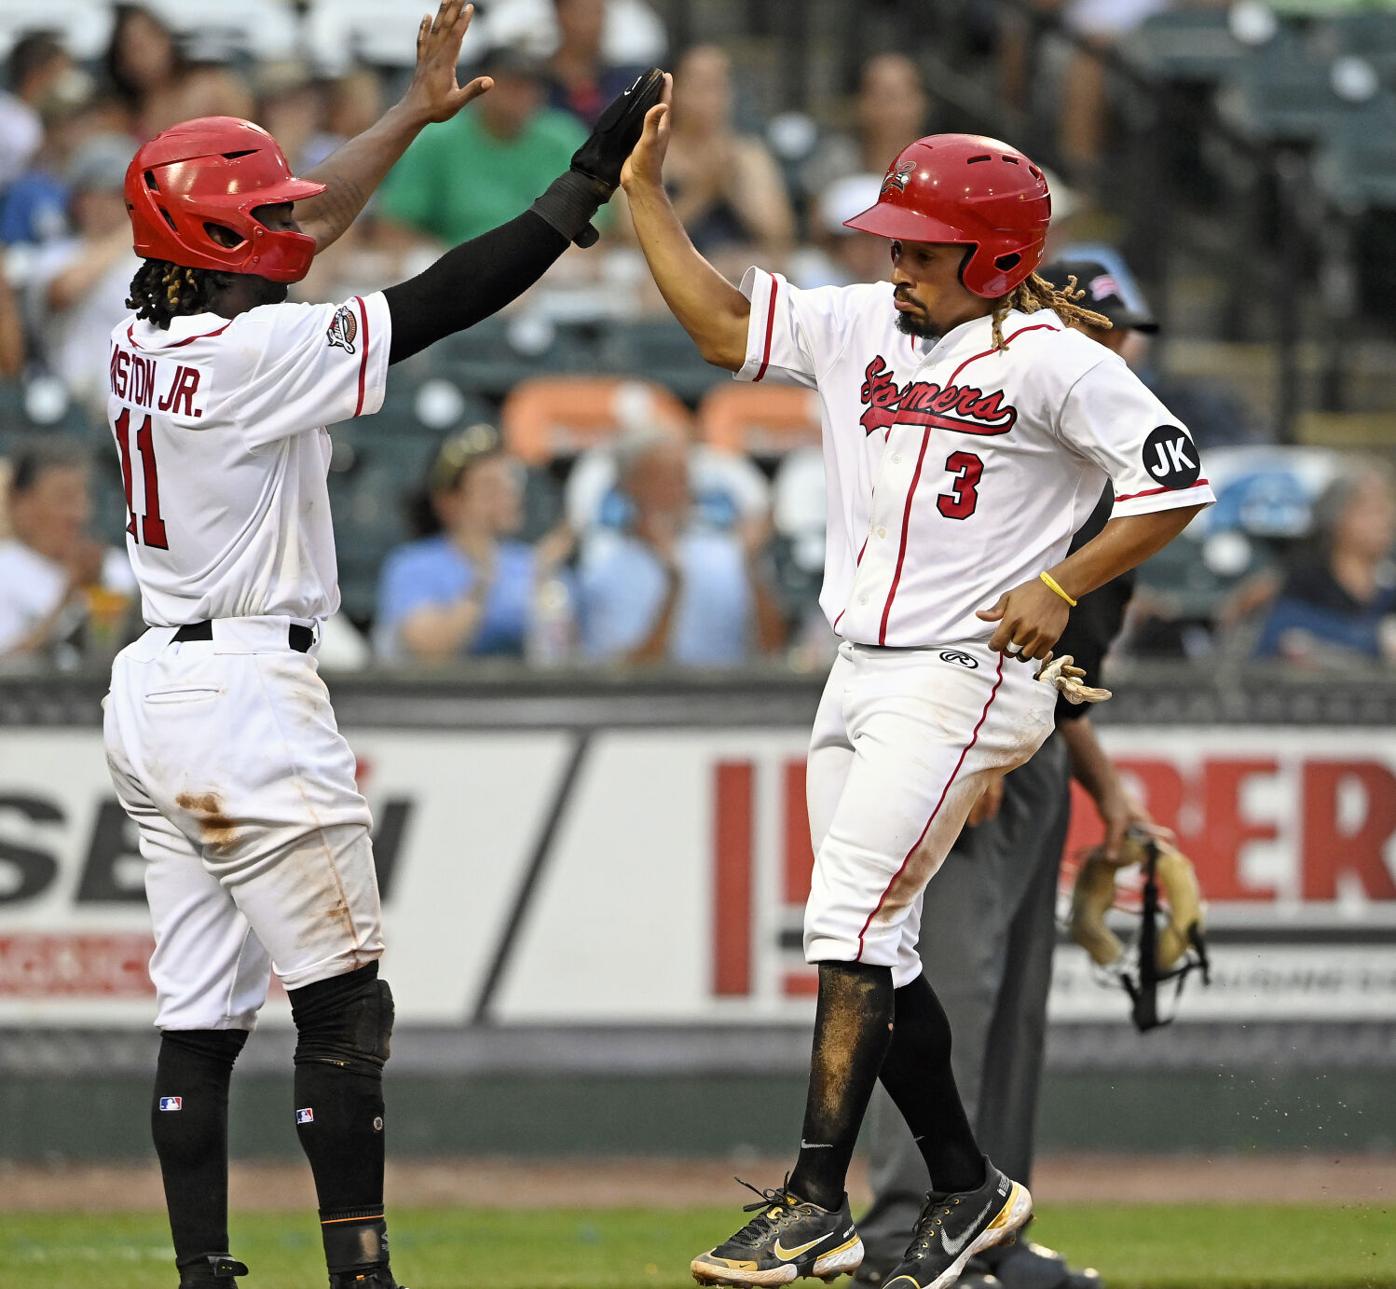 Barnstormers maintain North Division lead with win over Charleston, Lancaster Barnstormers